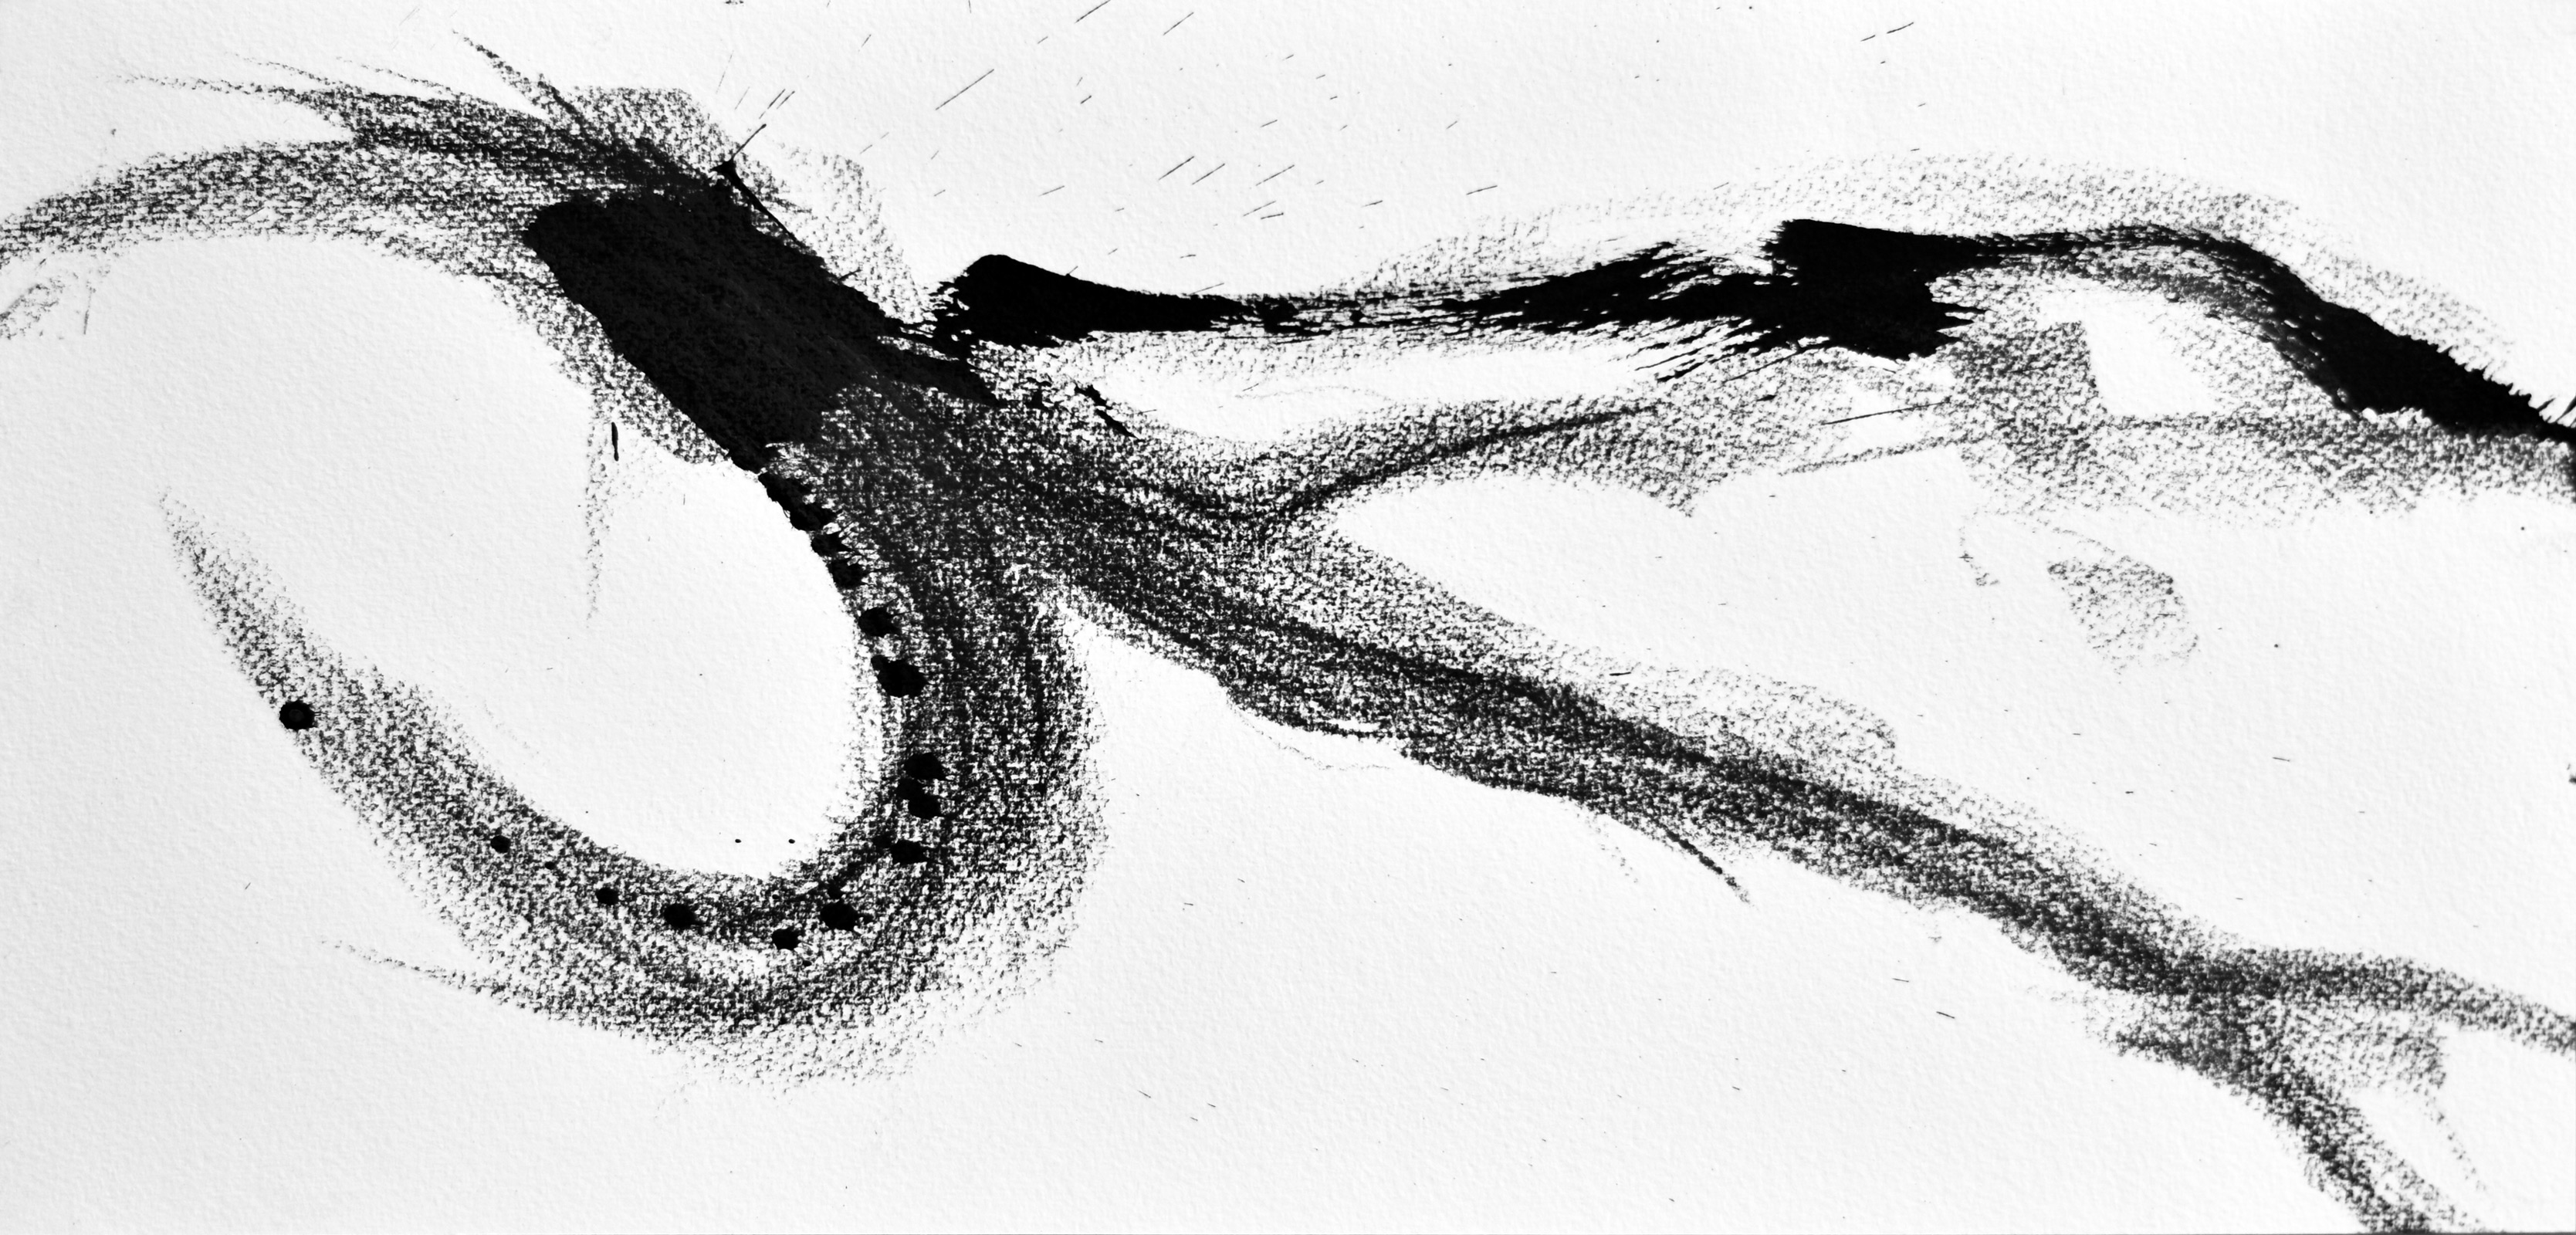 Movement Right, 2018, drawing by Adrian Mauriks.